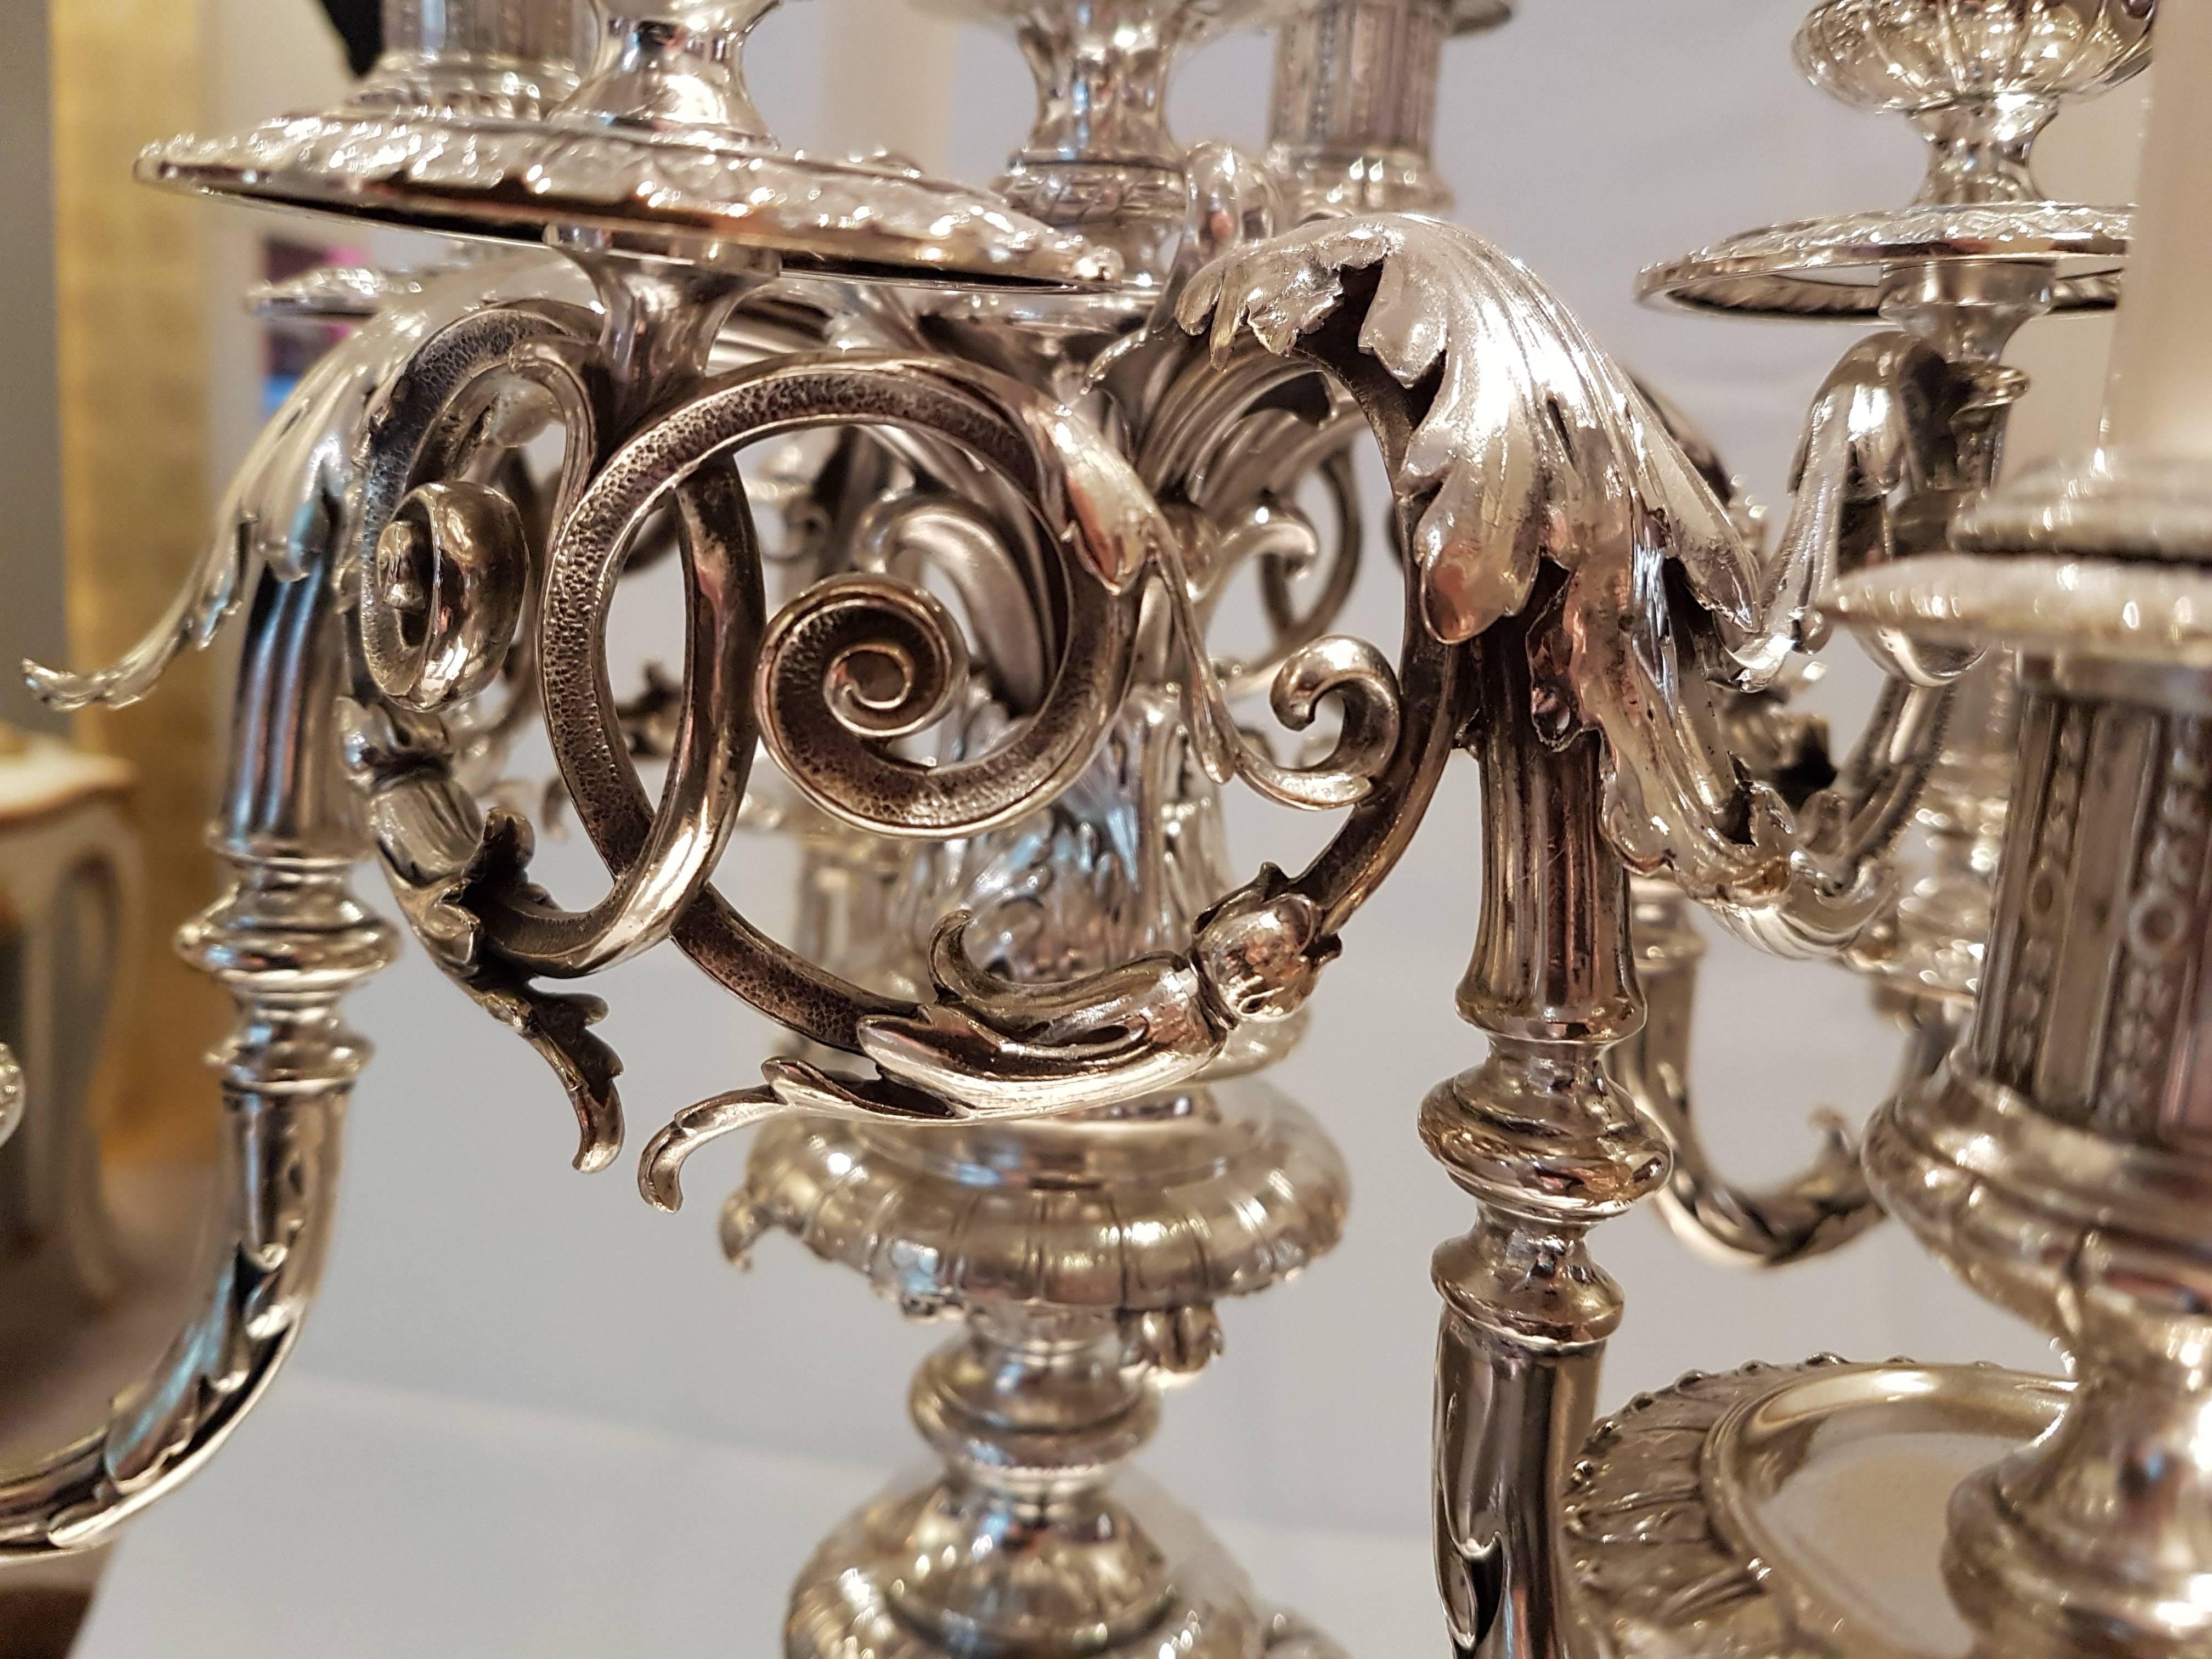 19th Century Sy & Wagner Nine Lights 800 Silver Candelabra In Excellent Condition For Sale In 10629, DE